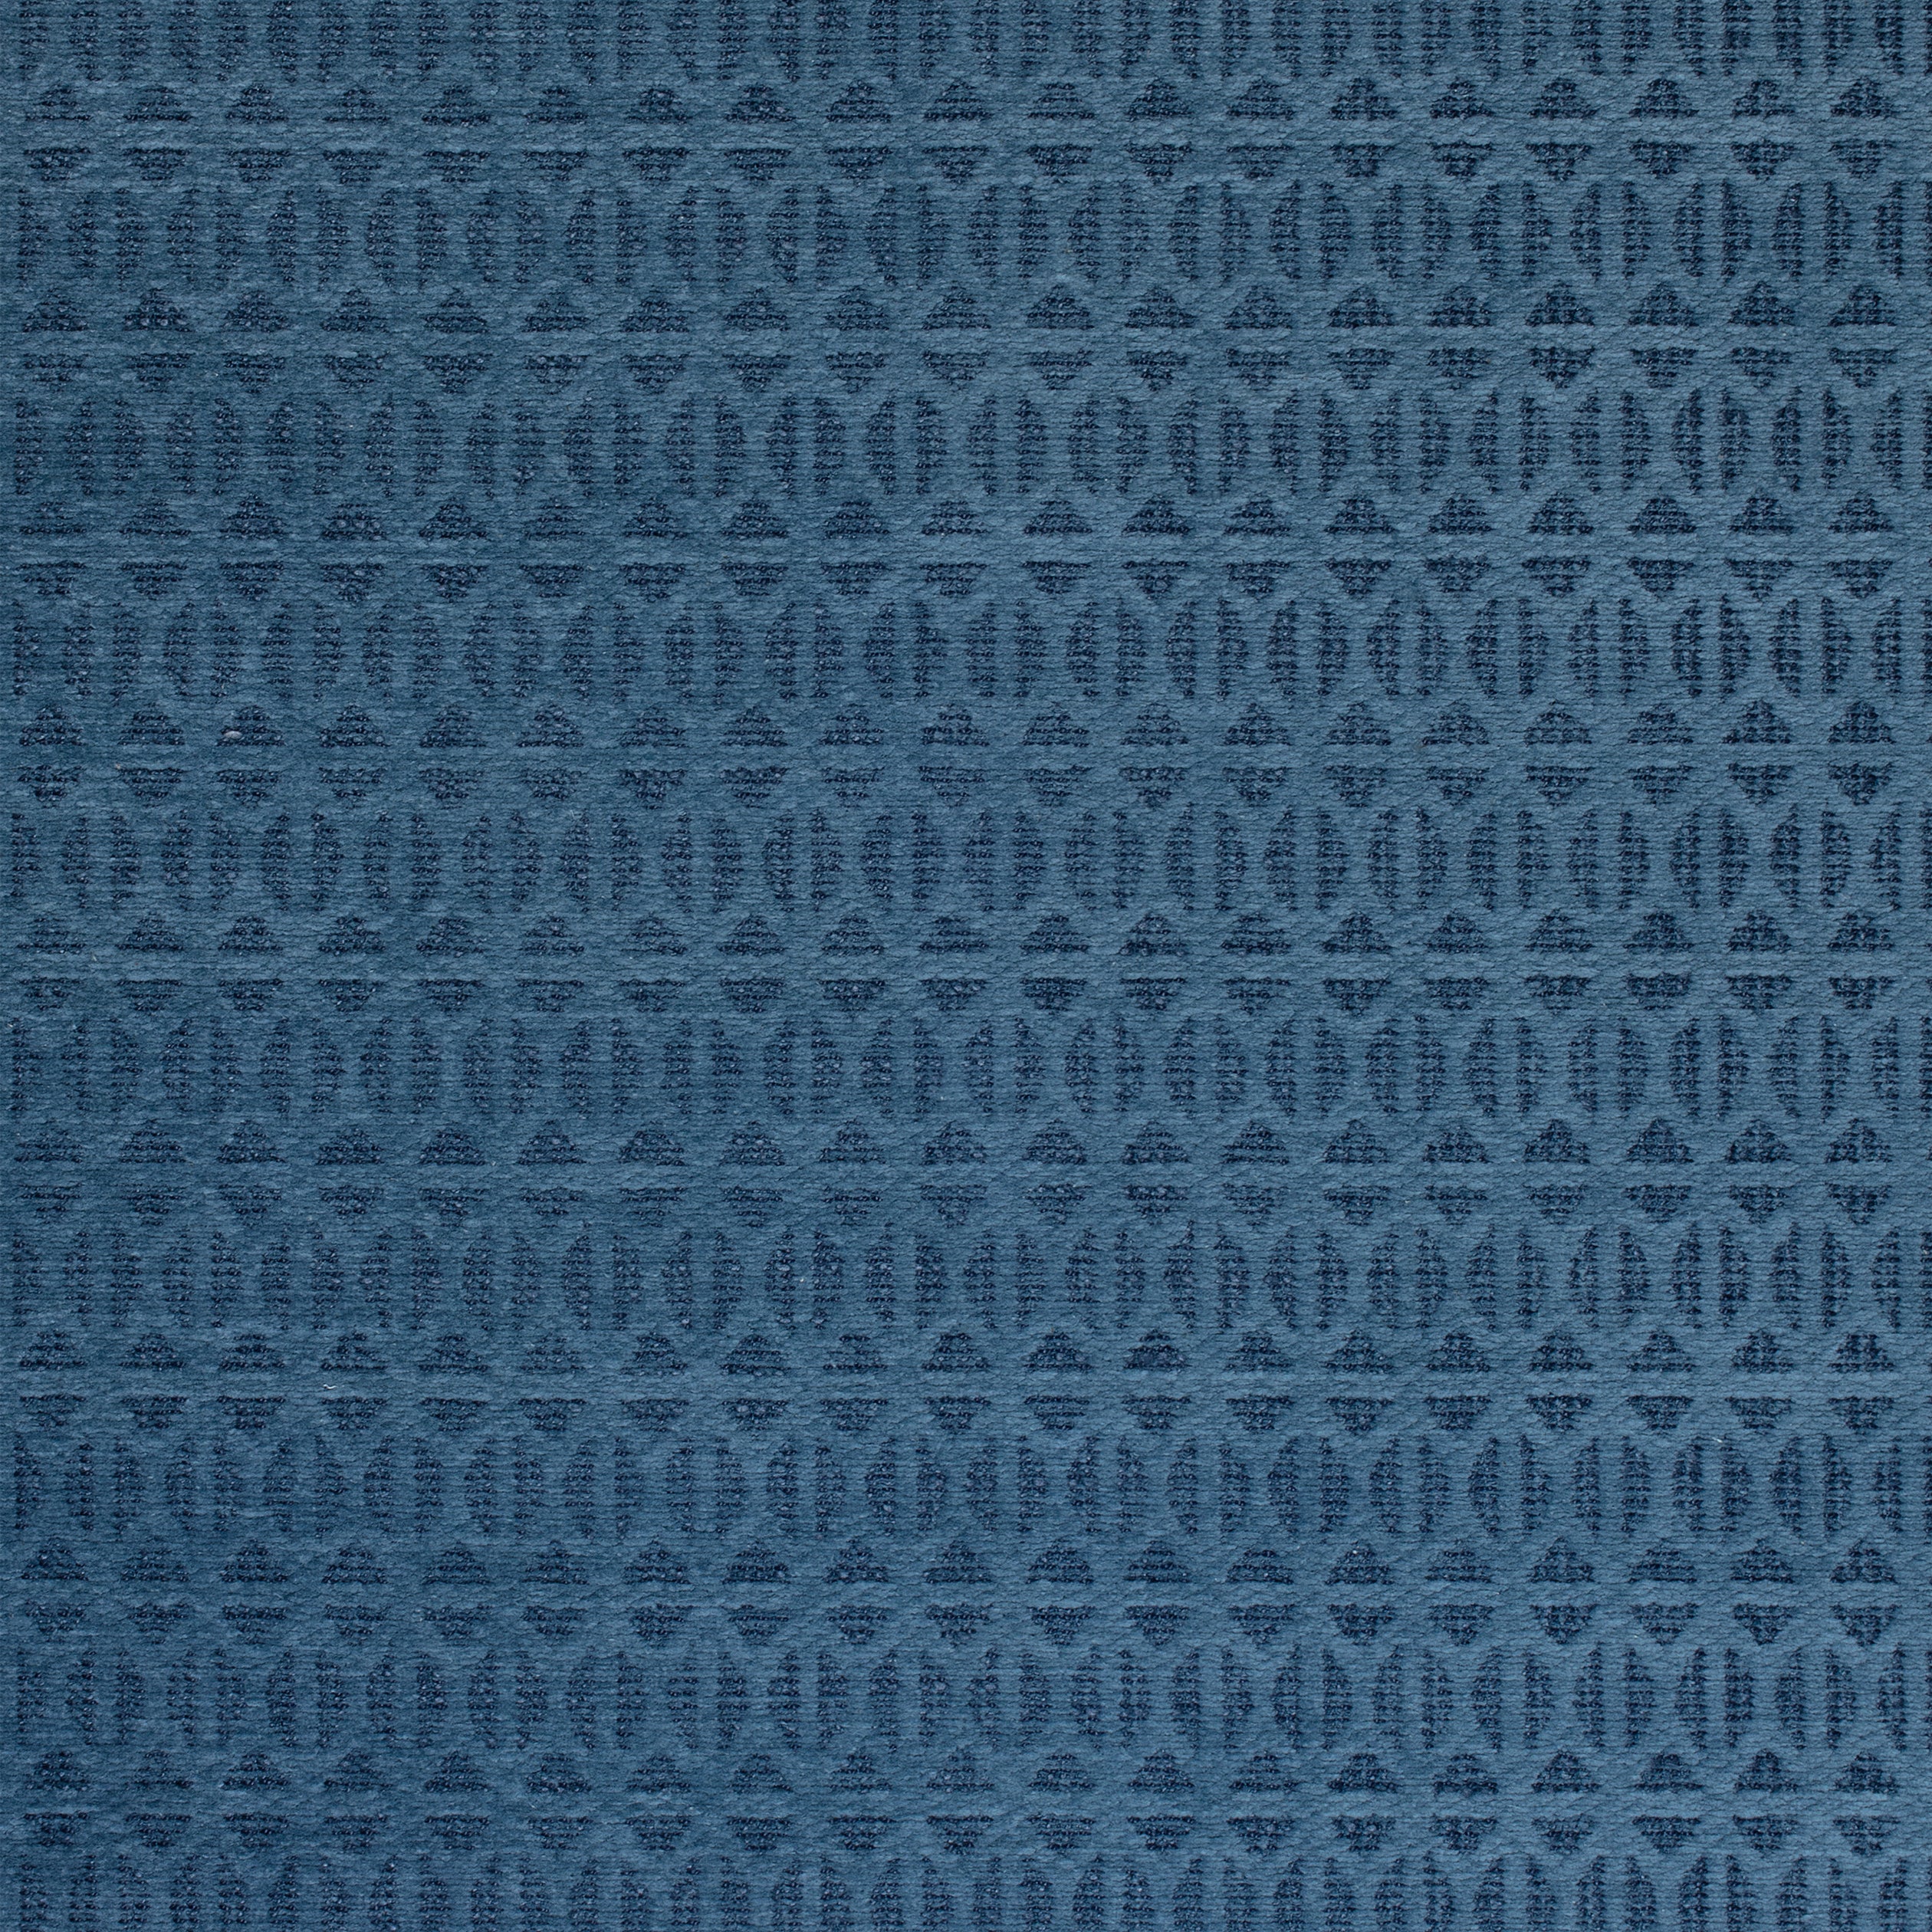 Quinlan fabric in navy color - pattern number W789104 - by Thibaut in the Reverie collection